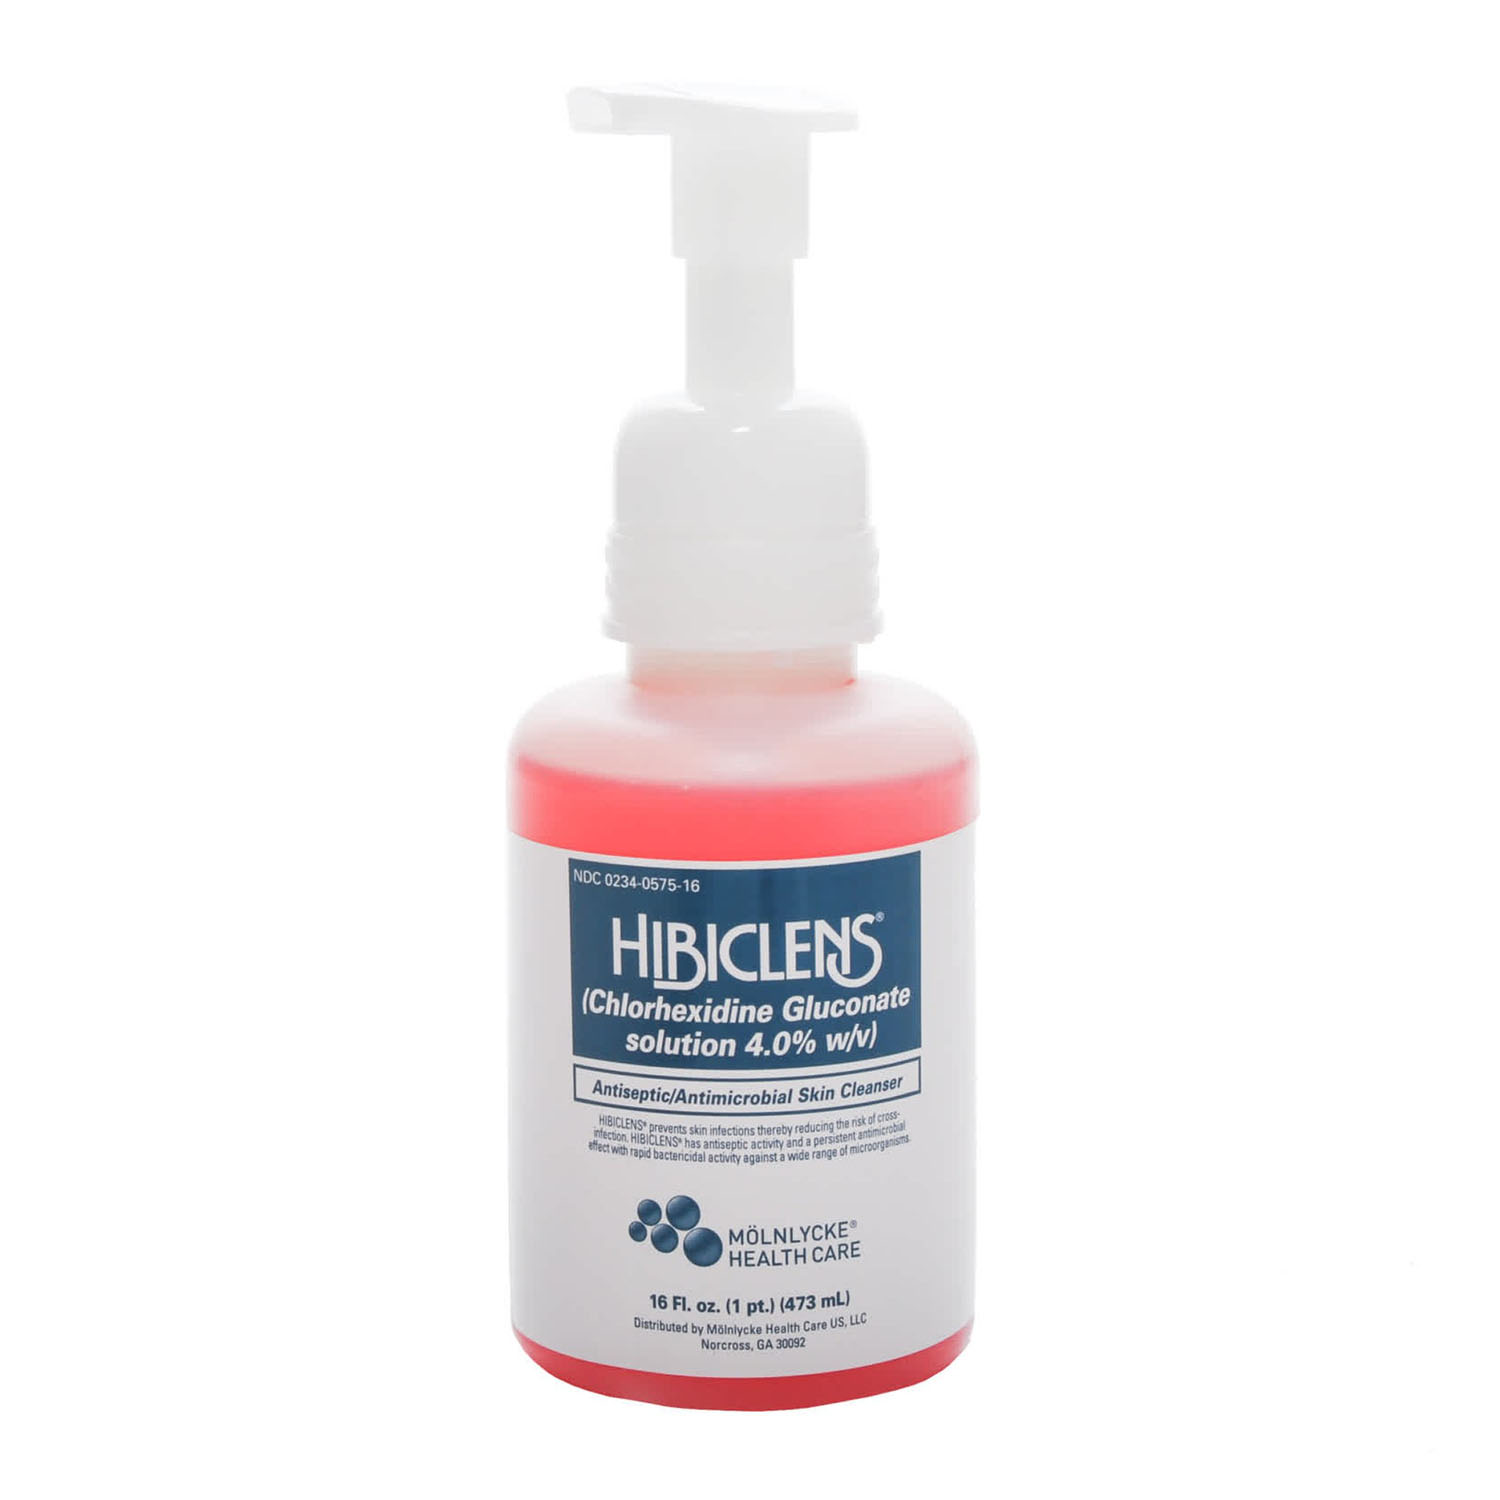 MOLNLYCKE HIBICLENS ANTISEPTIC ANTIMICROBIAL SKIN CLEANSER : 57516 EA                       $13.95 Stocked